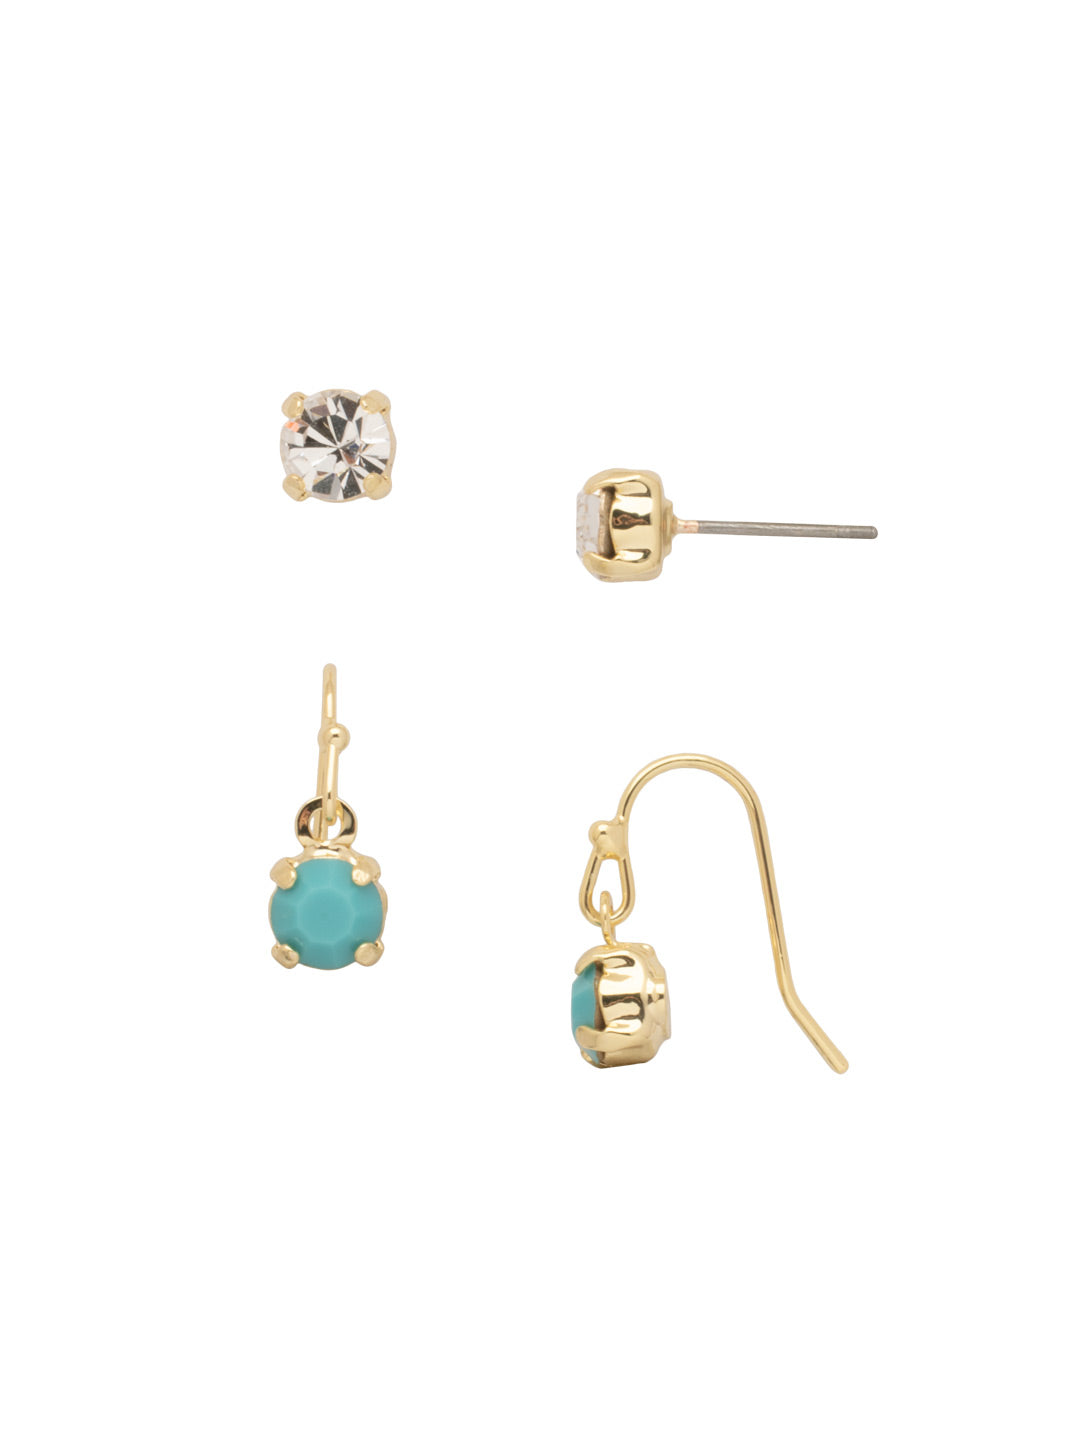 Jayda Set Dangle Earrings - EFM4BGSTO - <p>The Jayda Set Dangle Earrings include a pair of round-cut crystal studs and round-cut crystal dangle earrings, both dainty enough to wear together on the ear. From Sorrelli's Santorini collection in our Bright Gold-tone finish.</p>